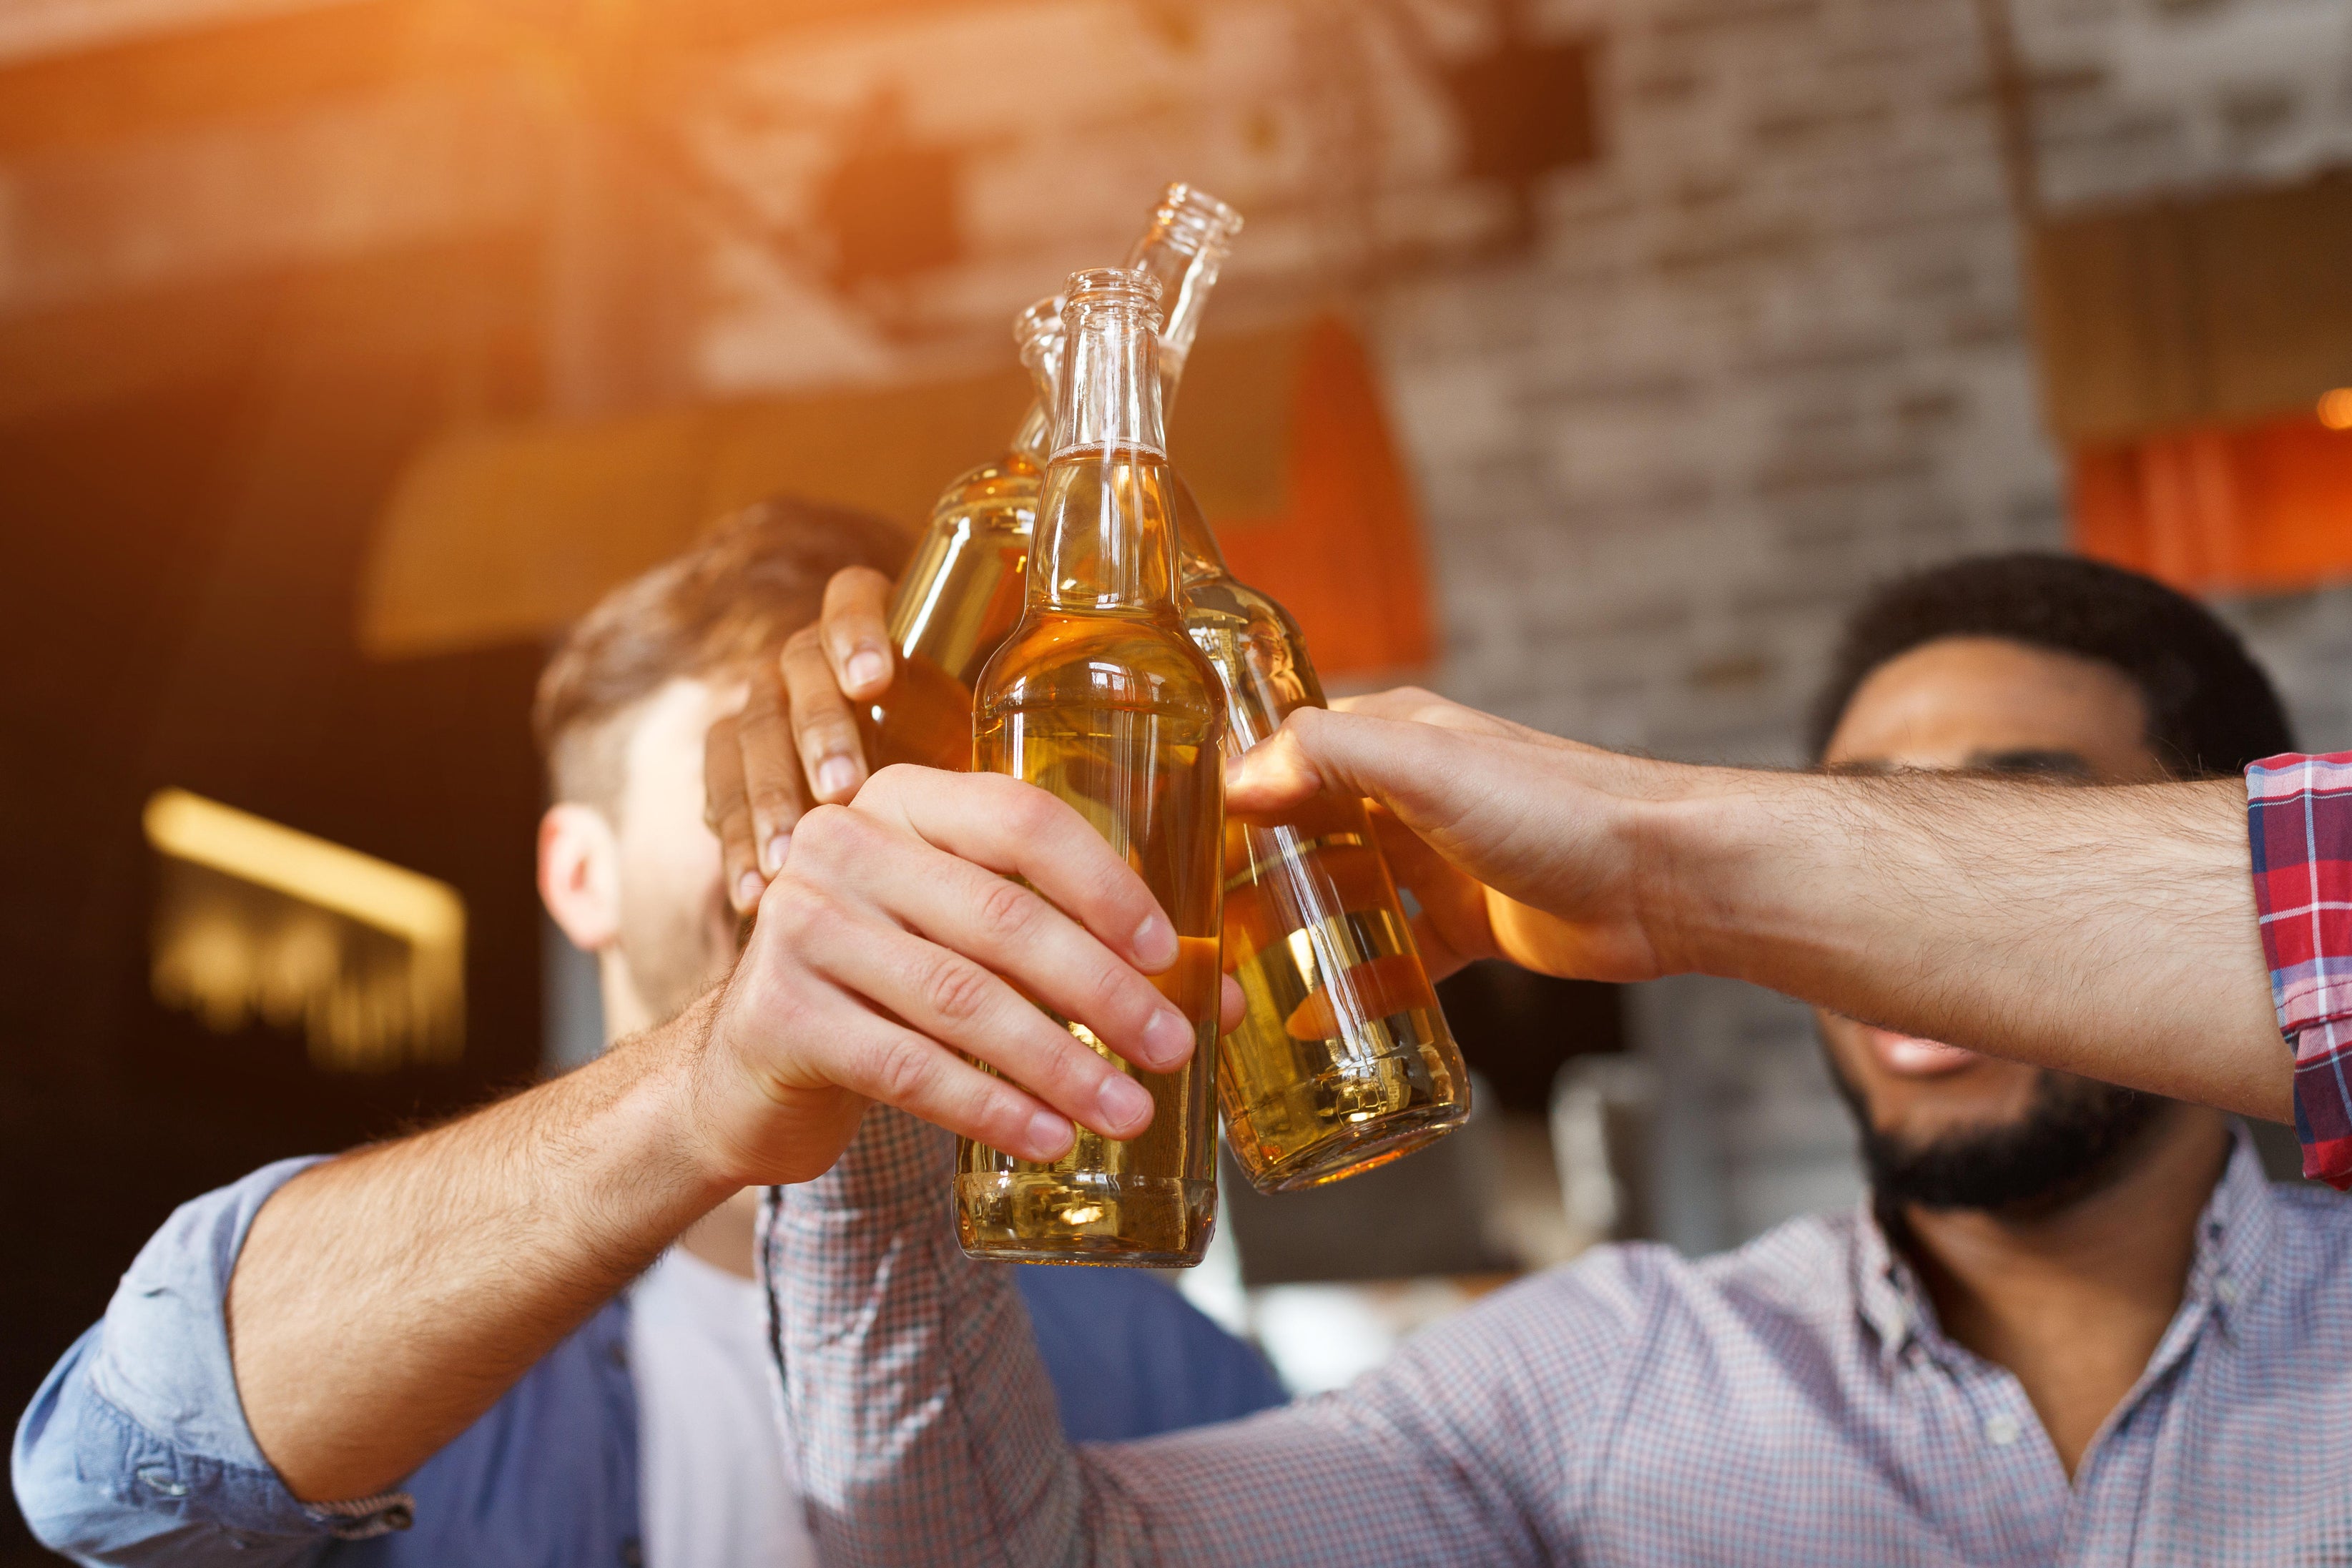 Excessive drinking has been found to shorten telomeres in the DNA